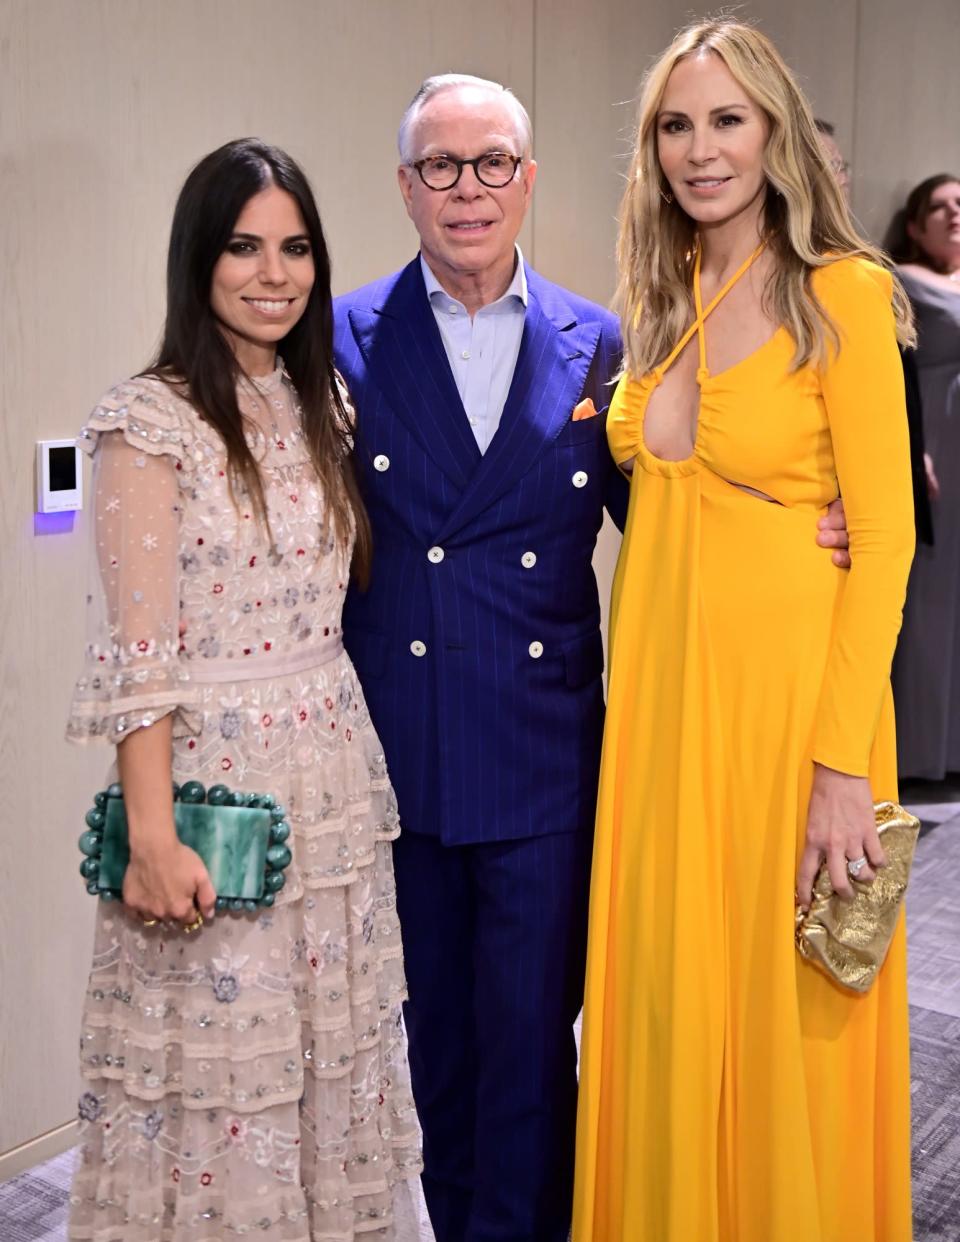 <p>Ally Hilfiger, Tommy Hilfiger, and Dee Ocleppo Hilfiger get together at the 29th Annual Race to Erase MS event in L.A. on May 20.</p>